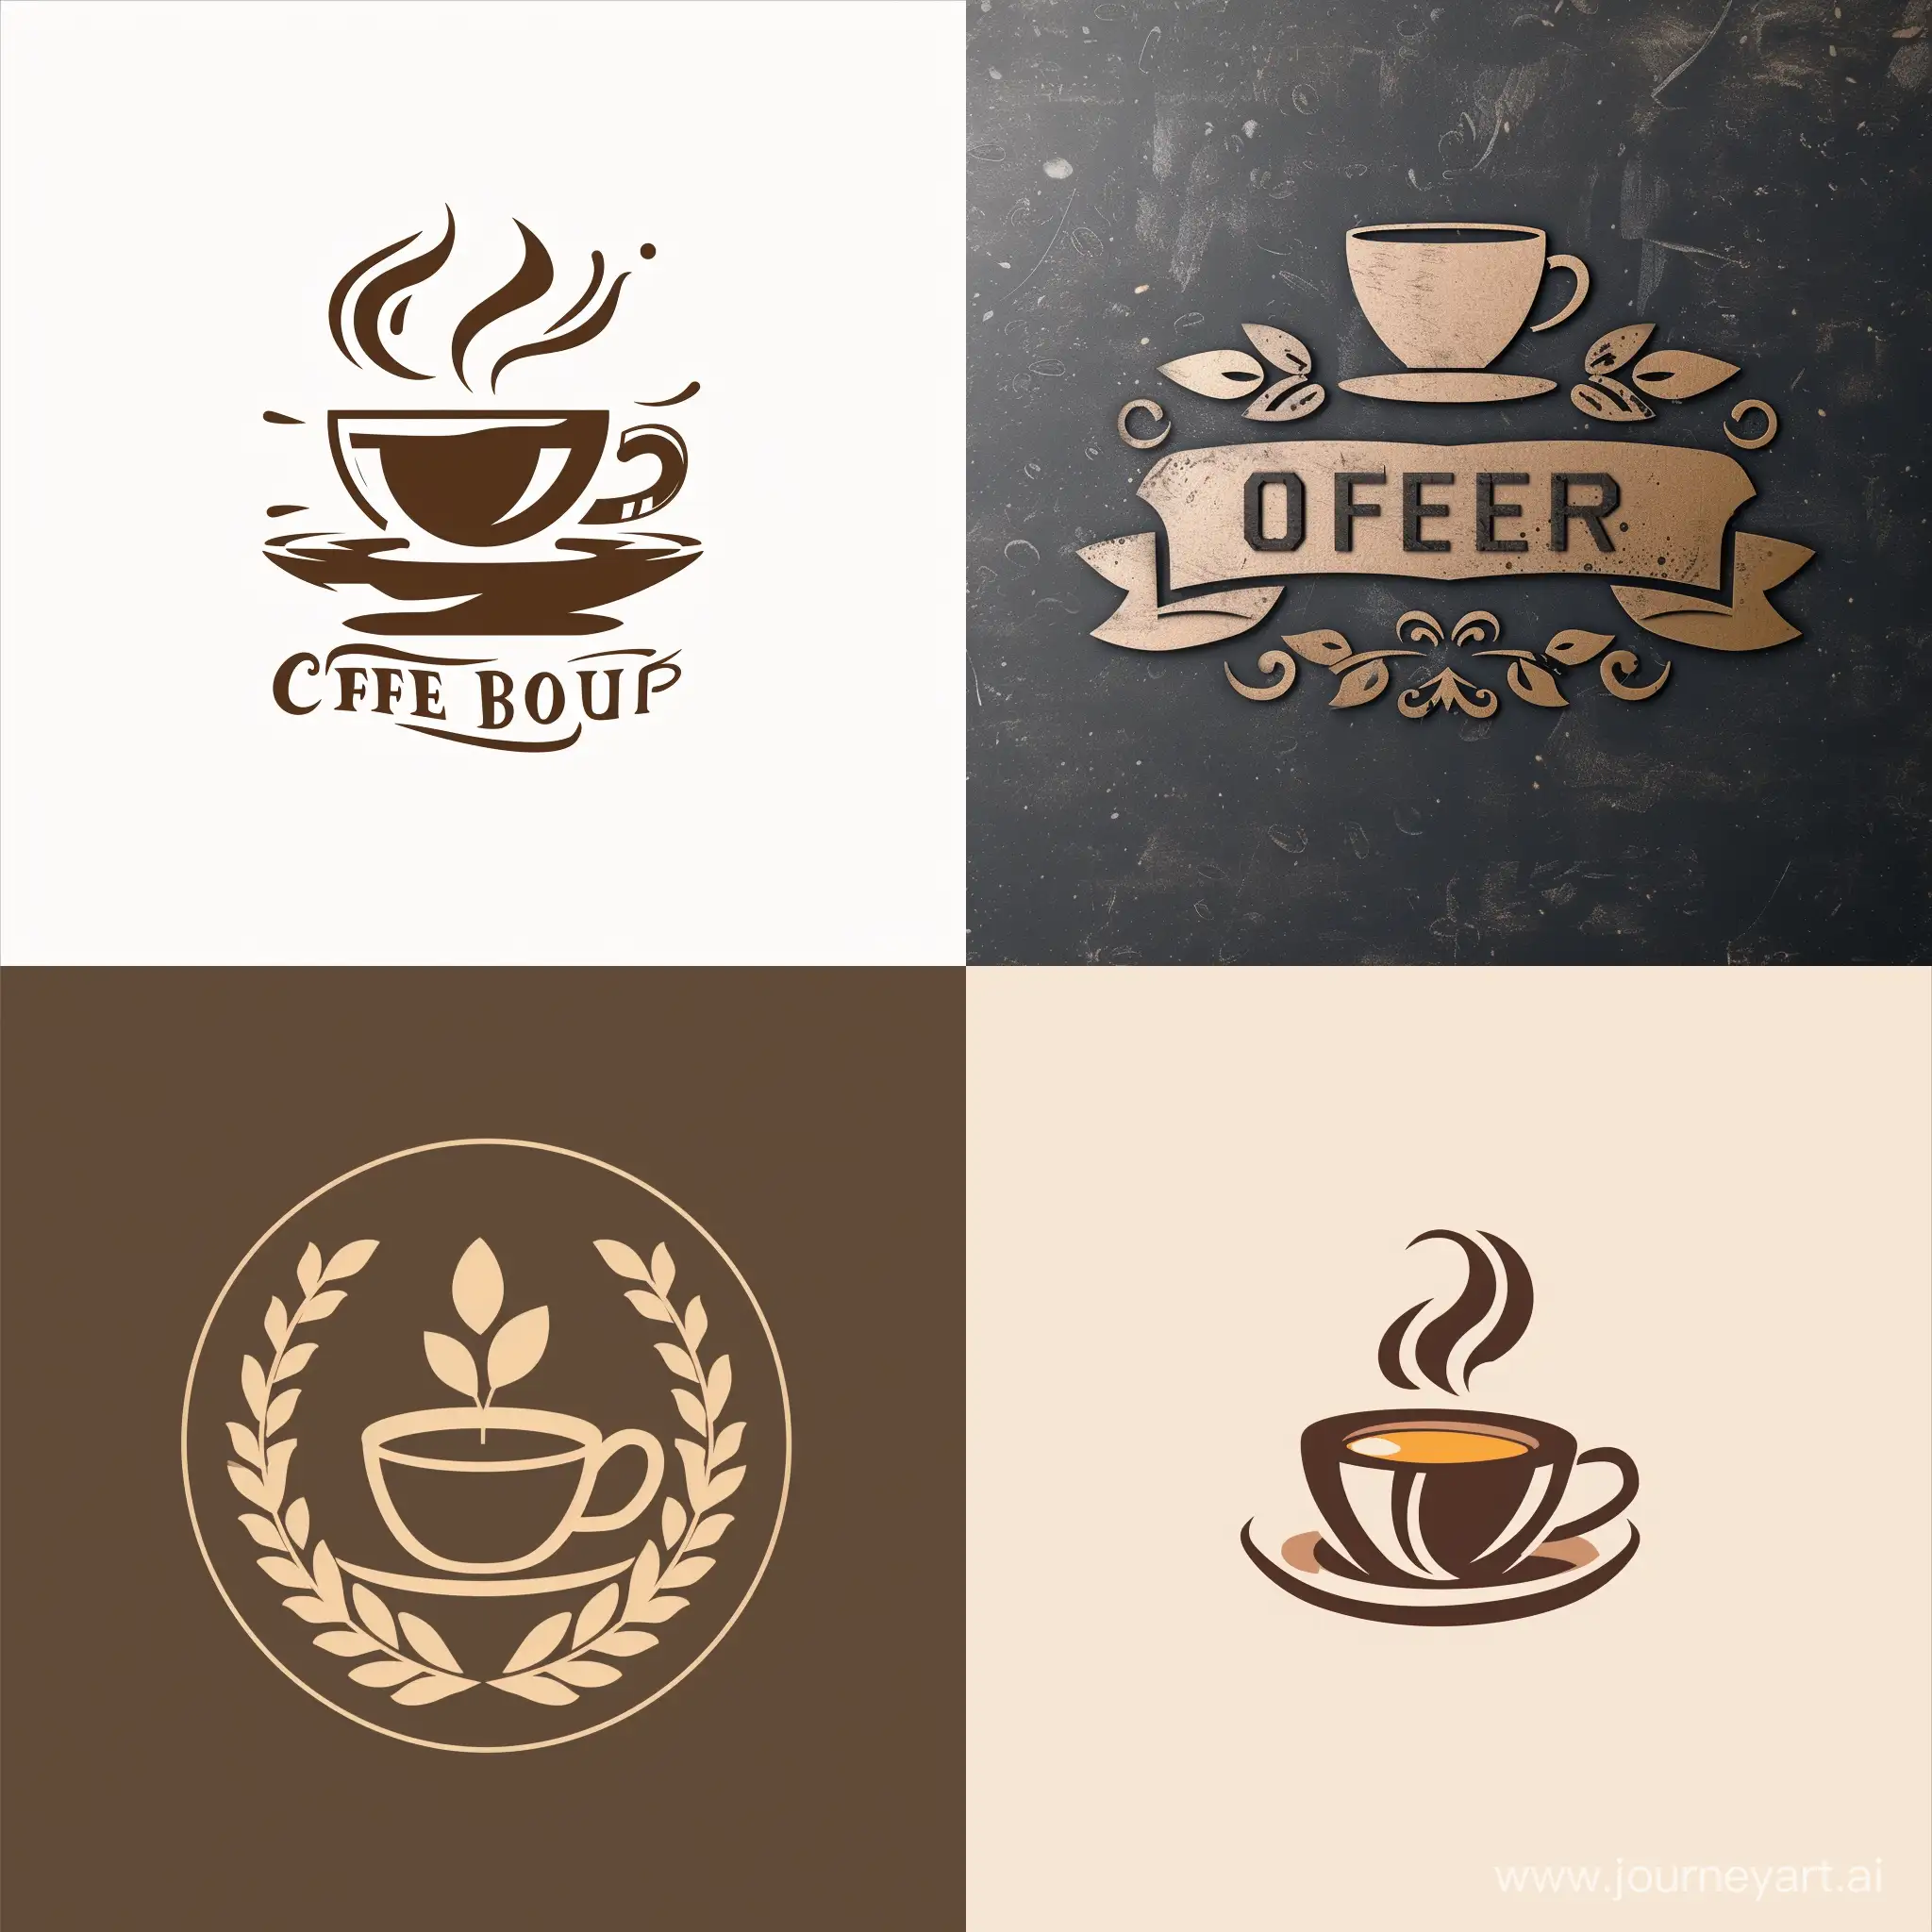 Cozy-Coffee-Shop-Logo-with-Steaming-Cup-and-Beans